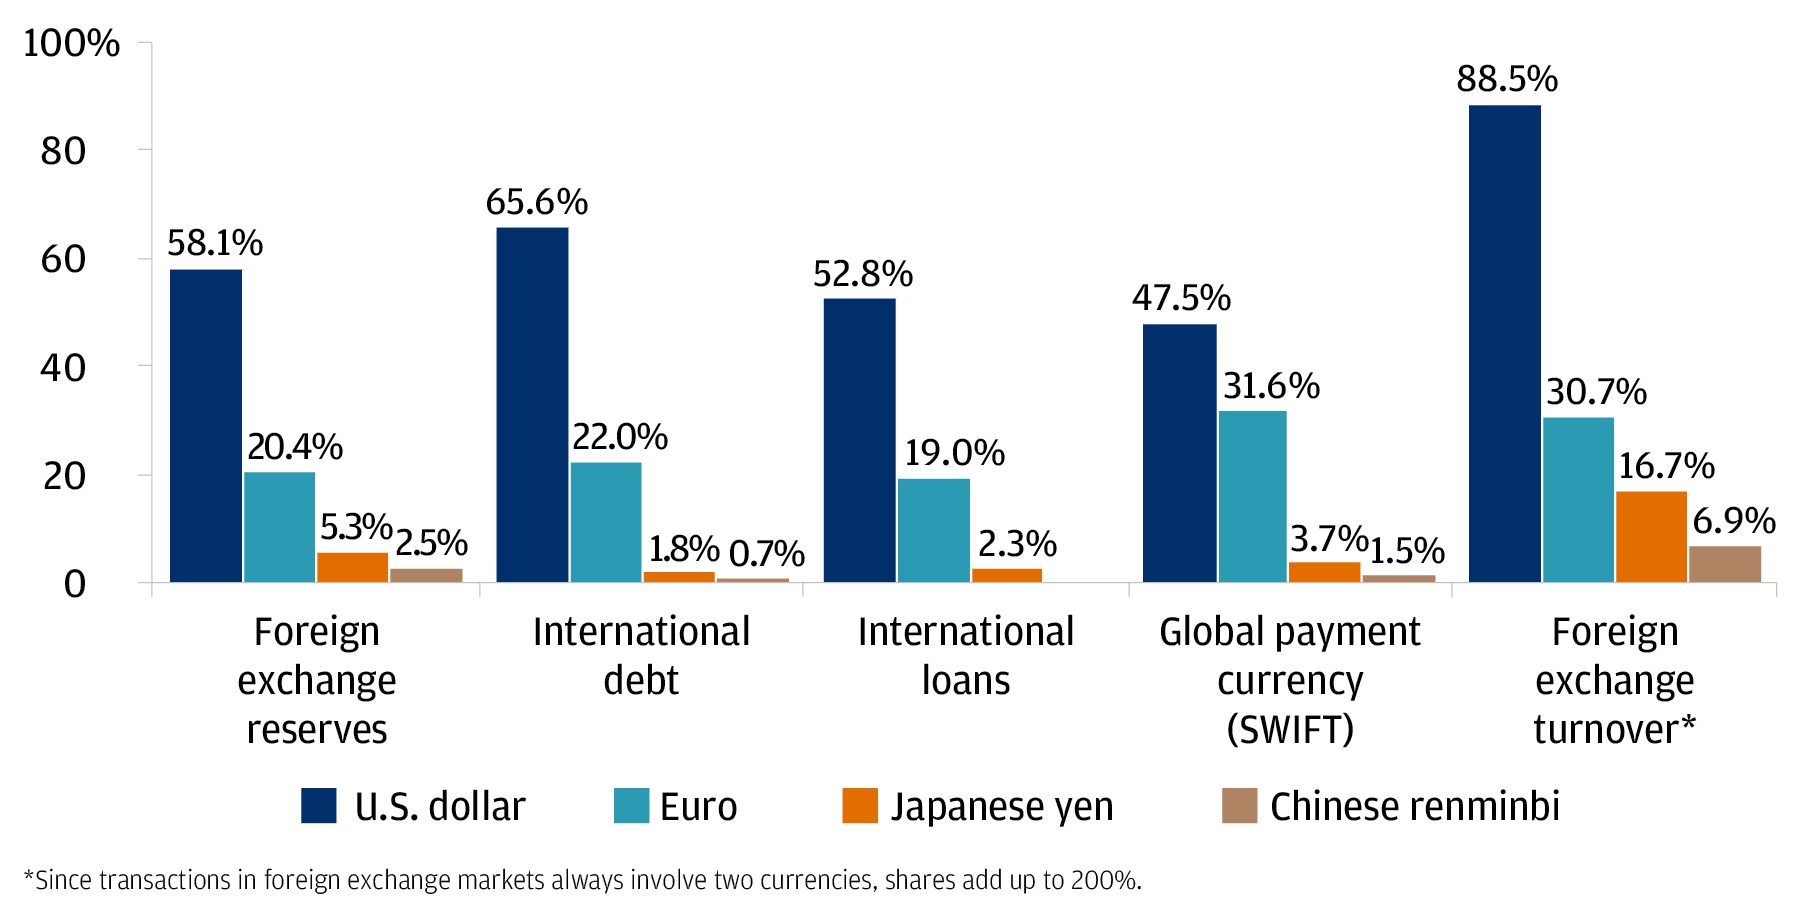 The chart describes each currency's % share of total when it comes to foreign exchange reserves, international debt, international loans, global payment currency (SWIFT), and foreign exchange turnover.